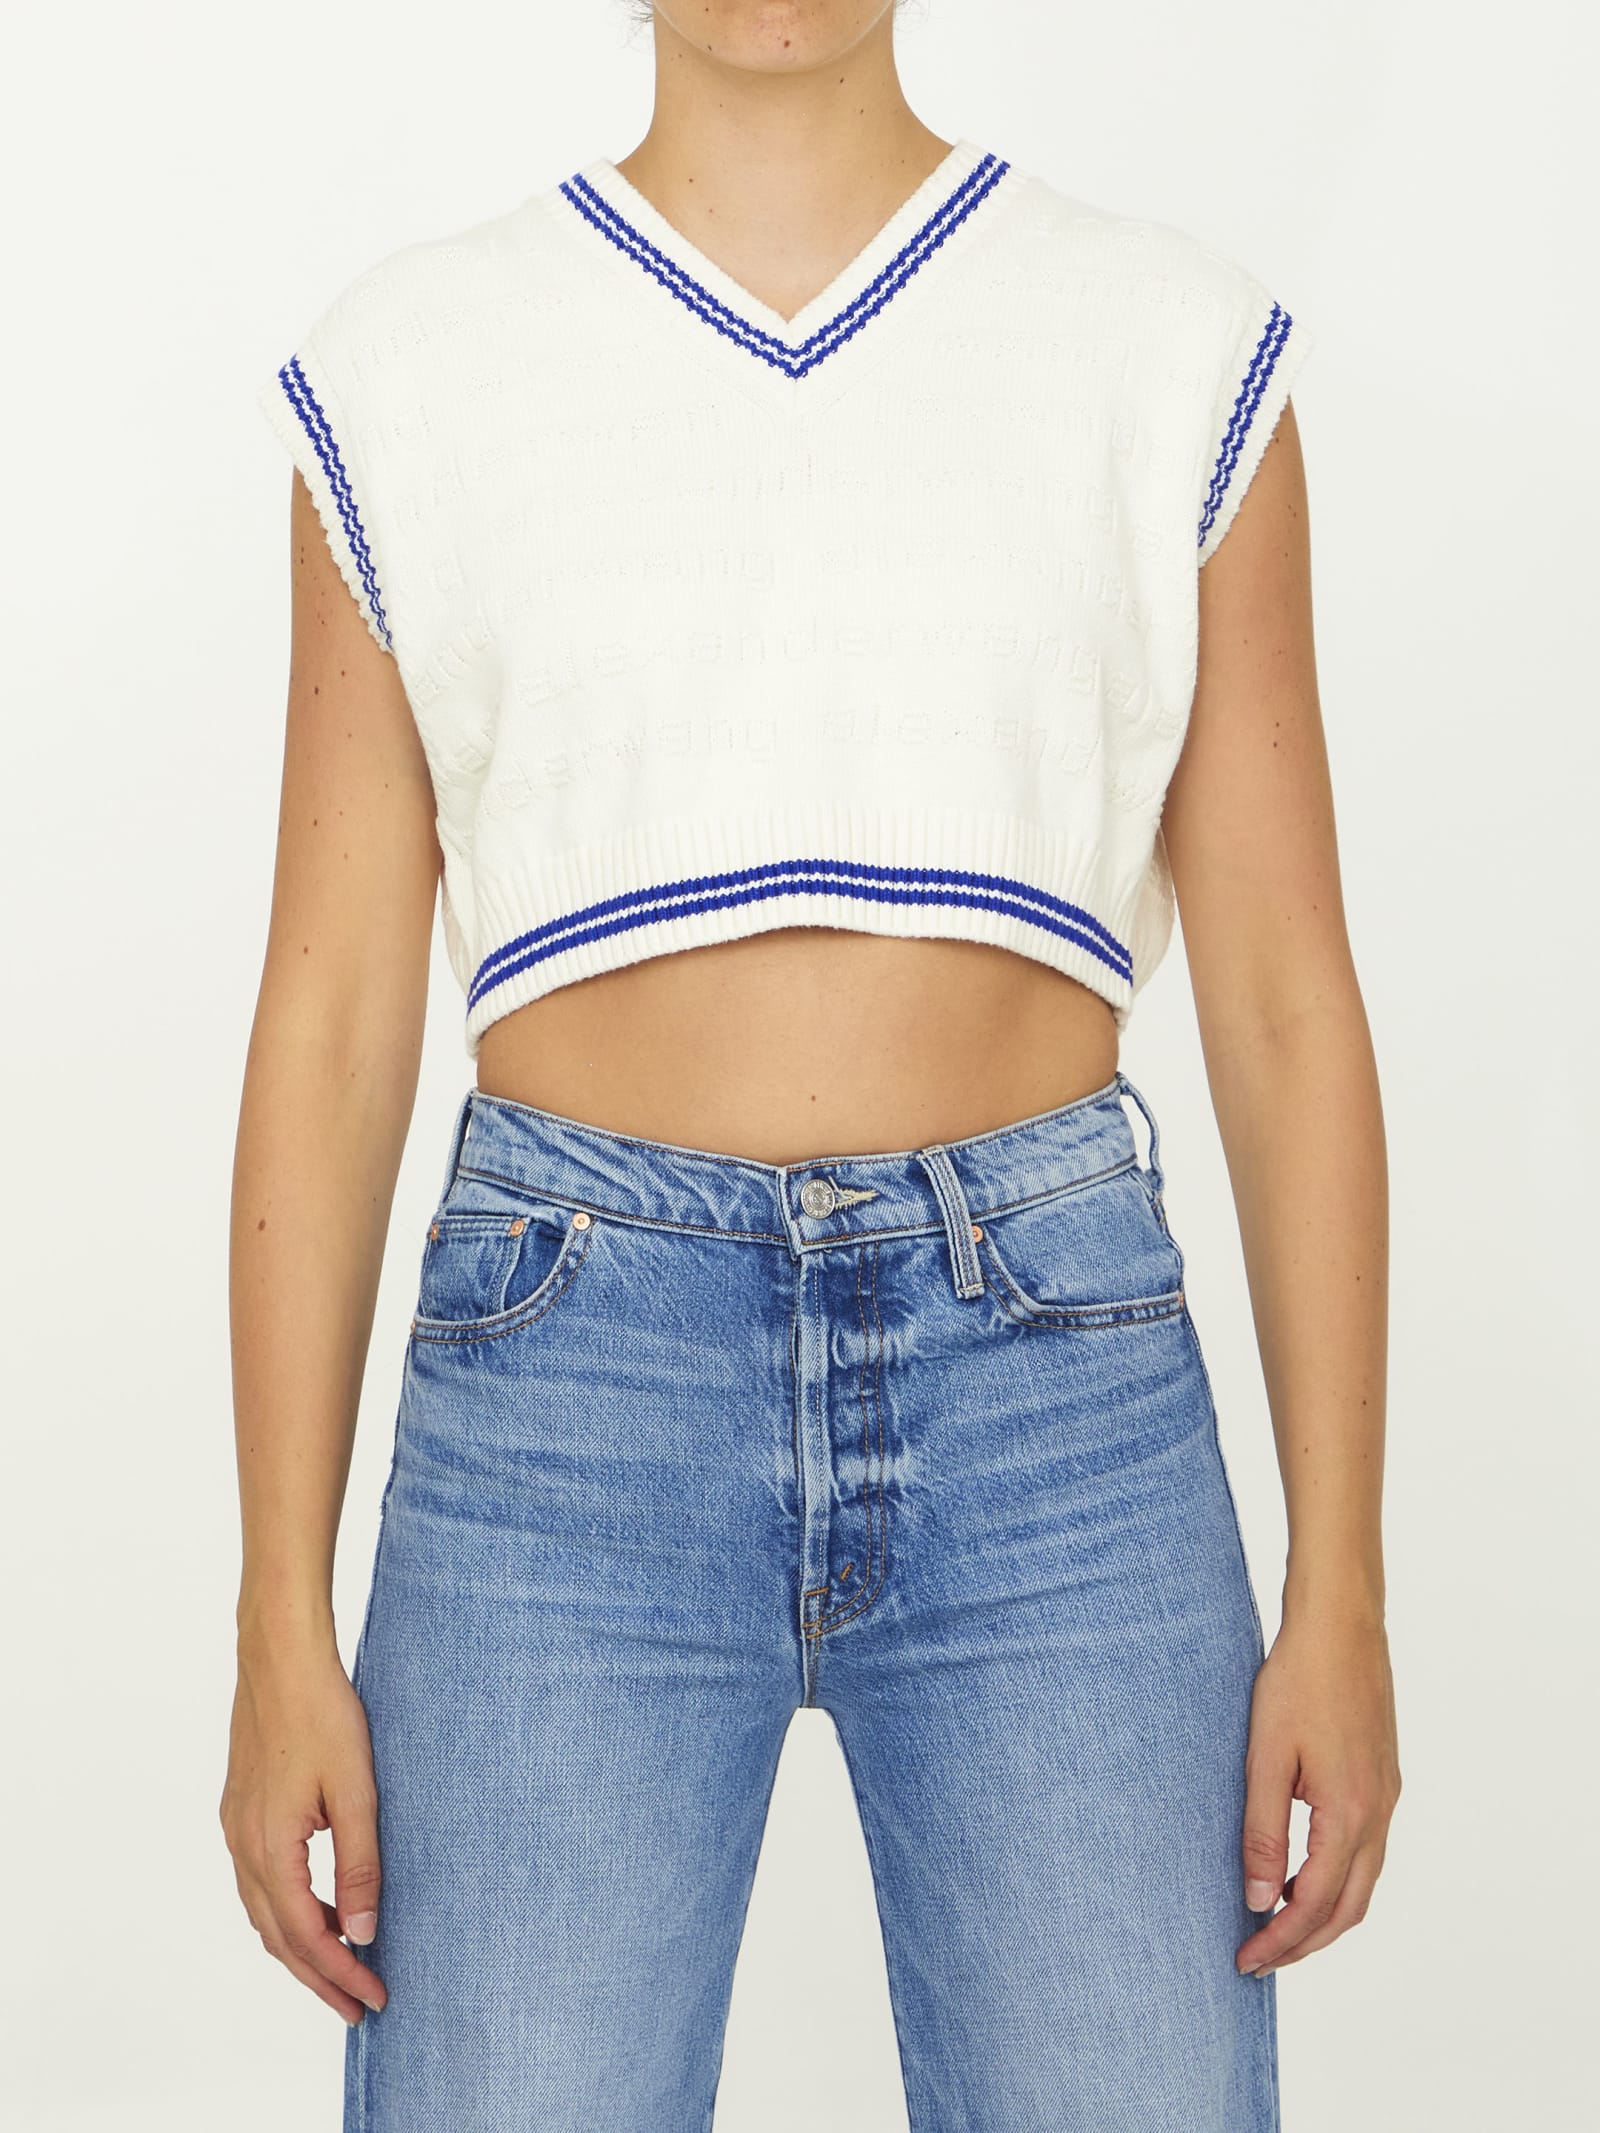 ALEXANDER WANG CROPPED VEST IN COMPACT COTTON